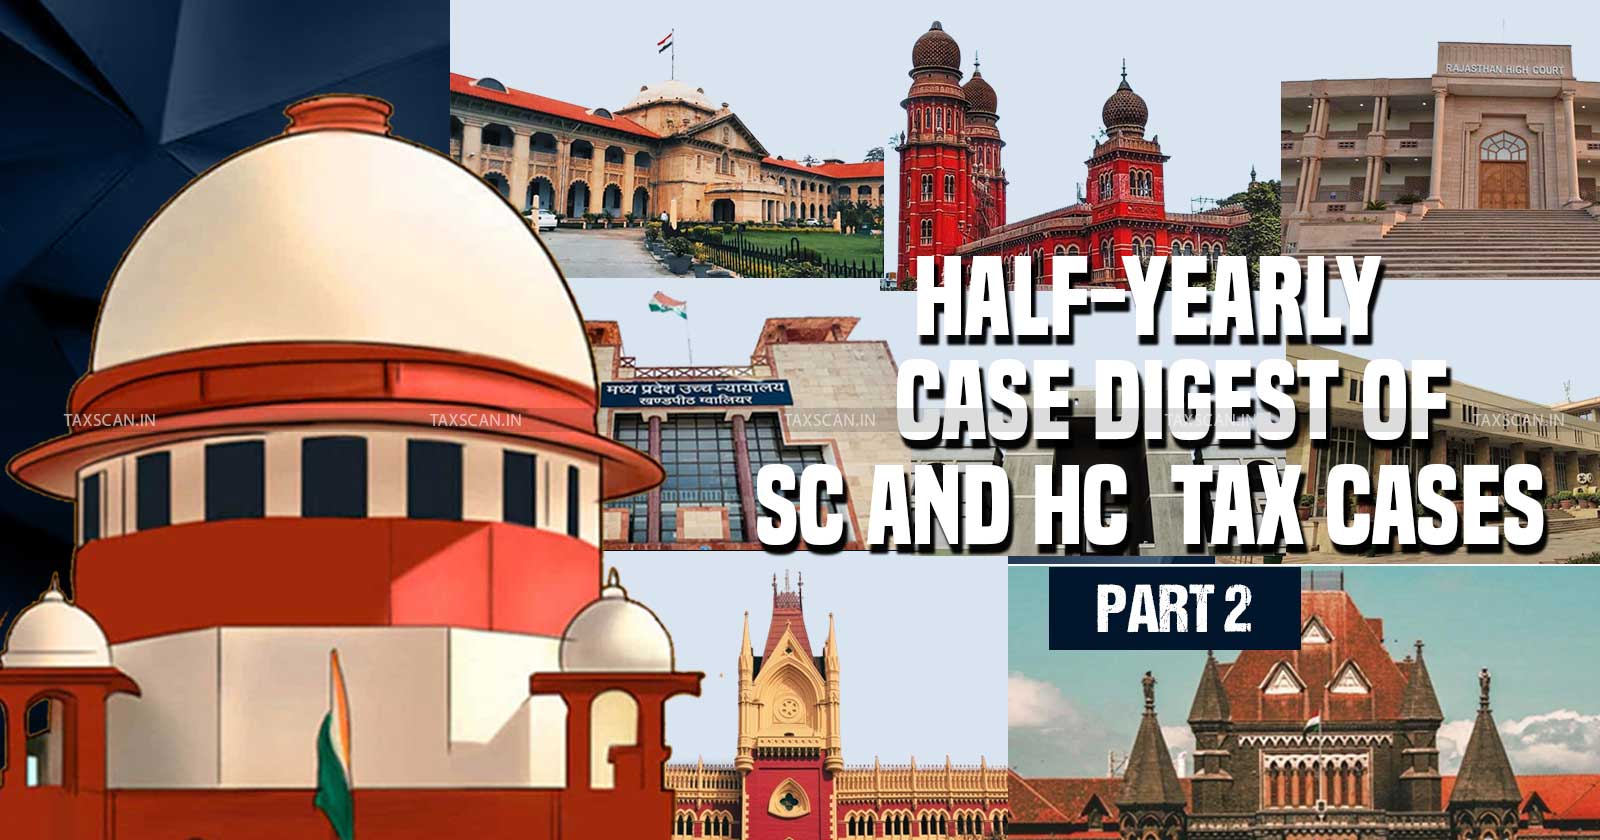 upreme Court - High Court Judgments - Half Yearly Case Digest - Supreme Court and High Courts Case Digest - Half Yearly Digest of Tax Cases - Supreme Court Tax Judgments - High Court Tax Judgments - taxscan